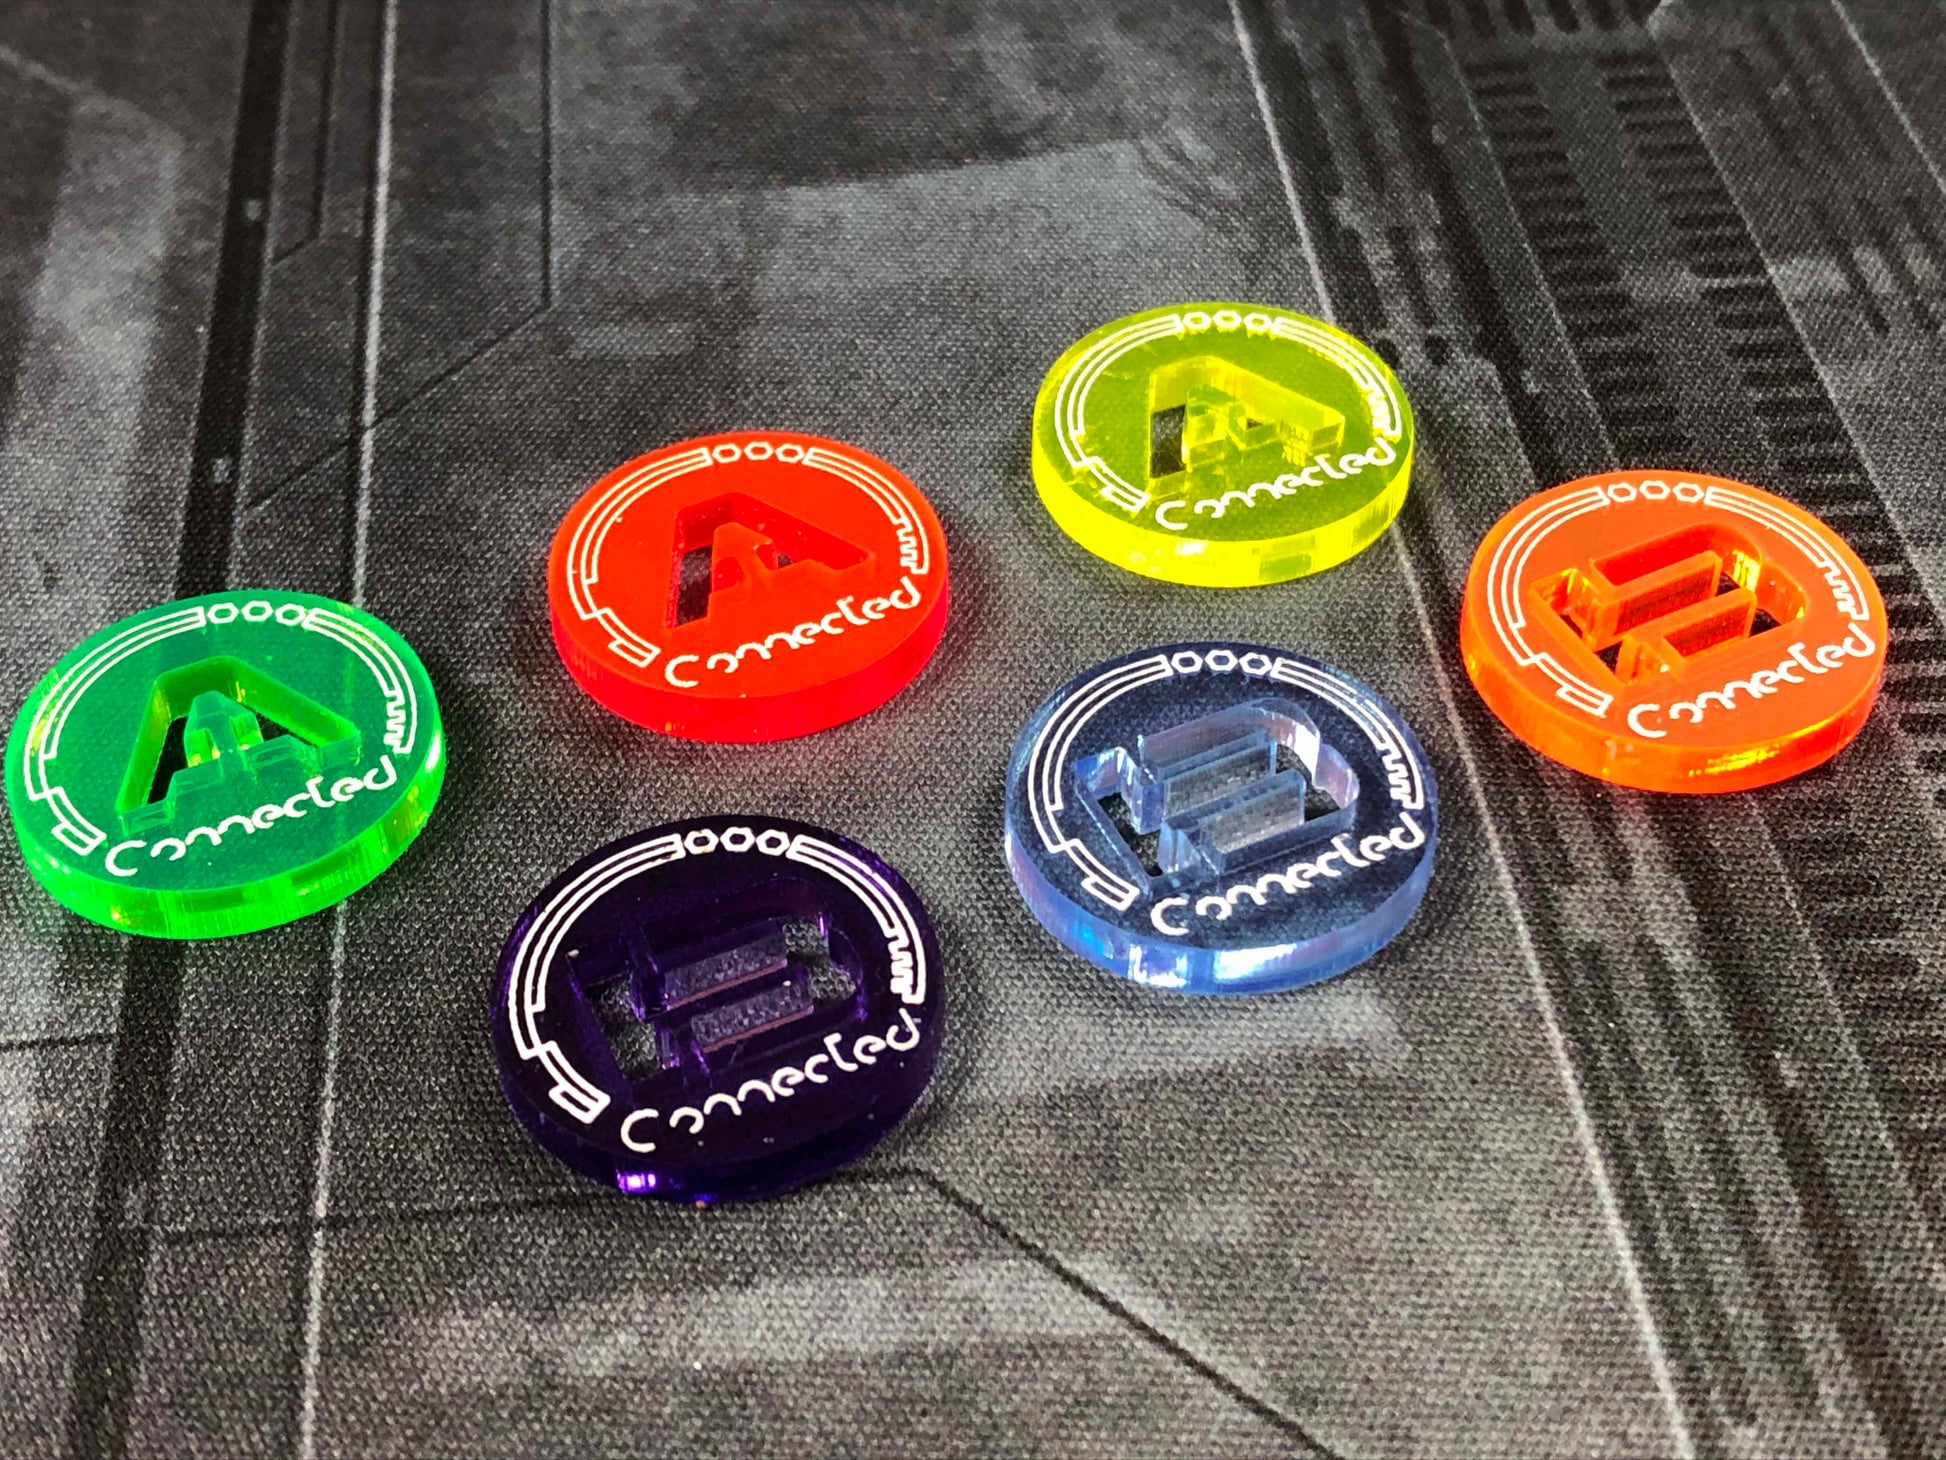 Infinity Connected Tokens